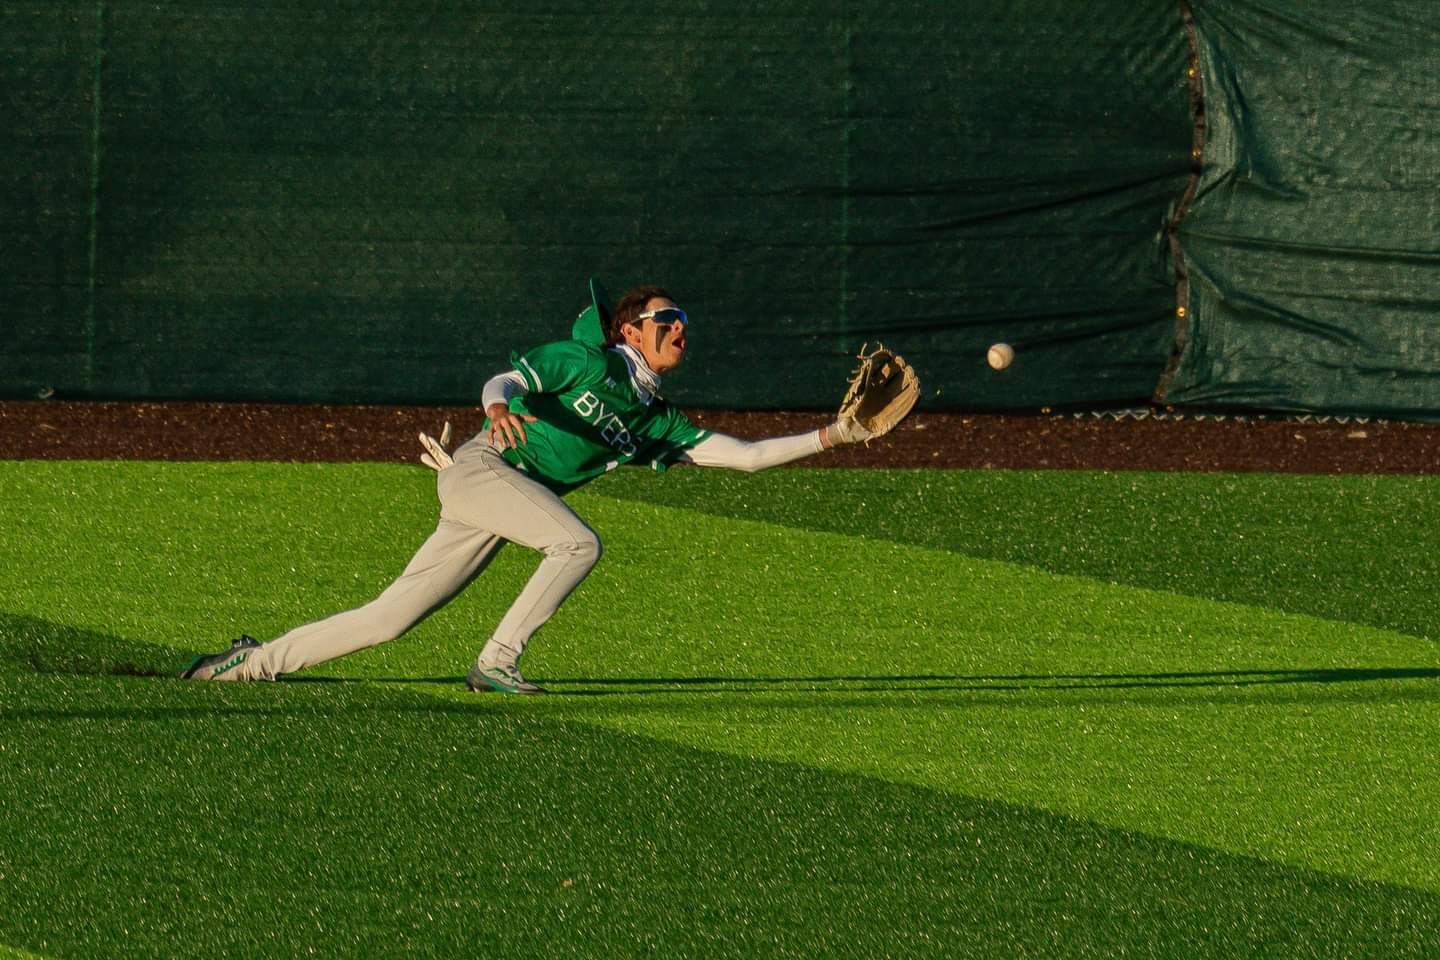 Byers Baseball player diving for the ball